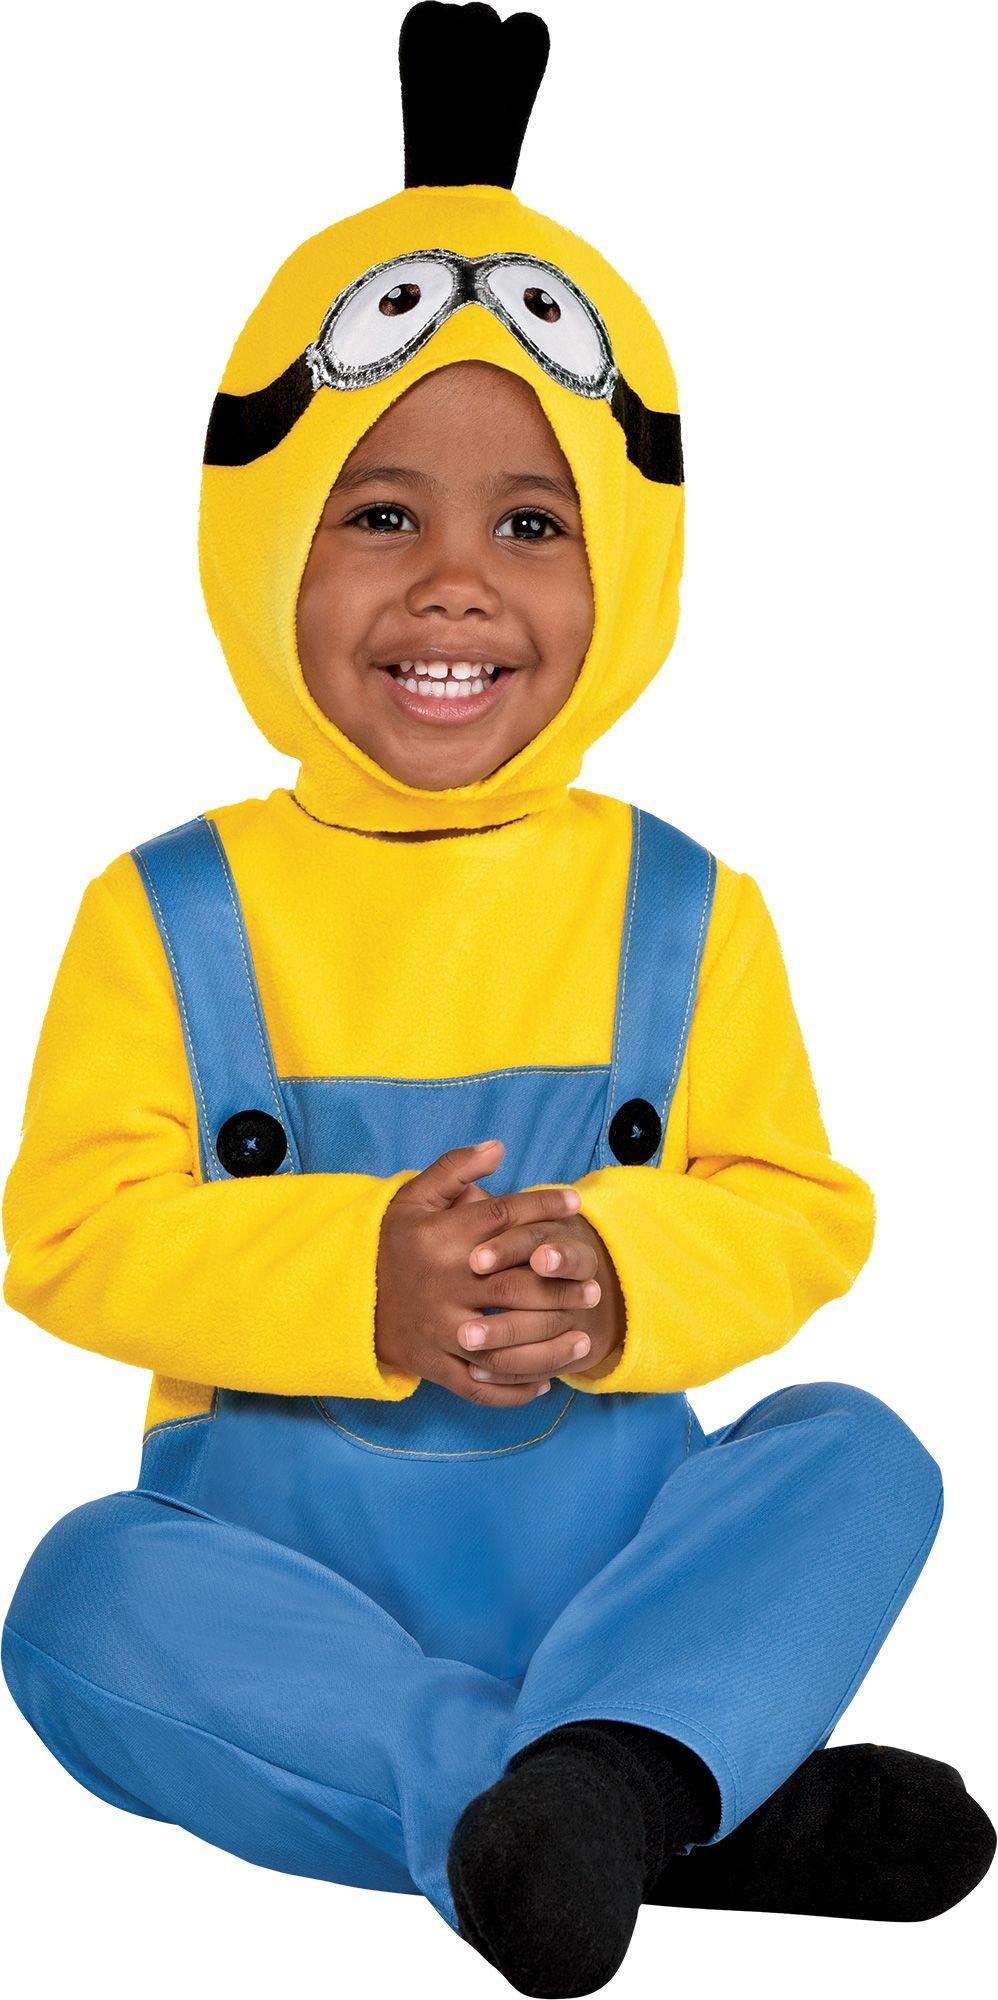  Party City Minion Halloween Costume for Women, Minions